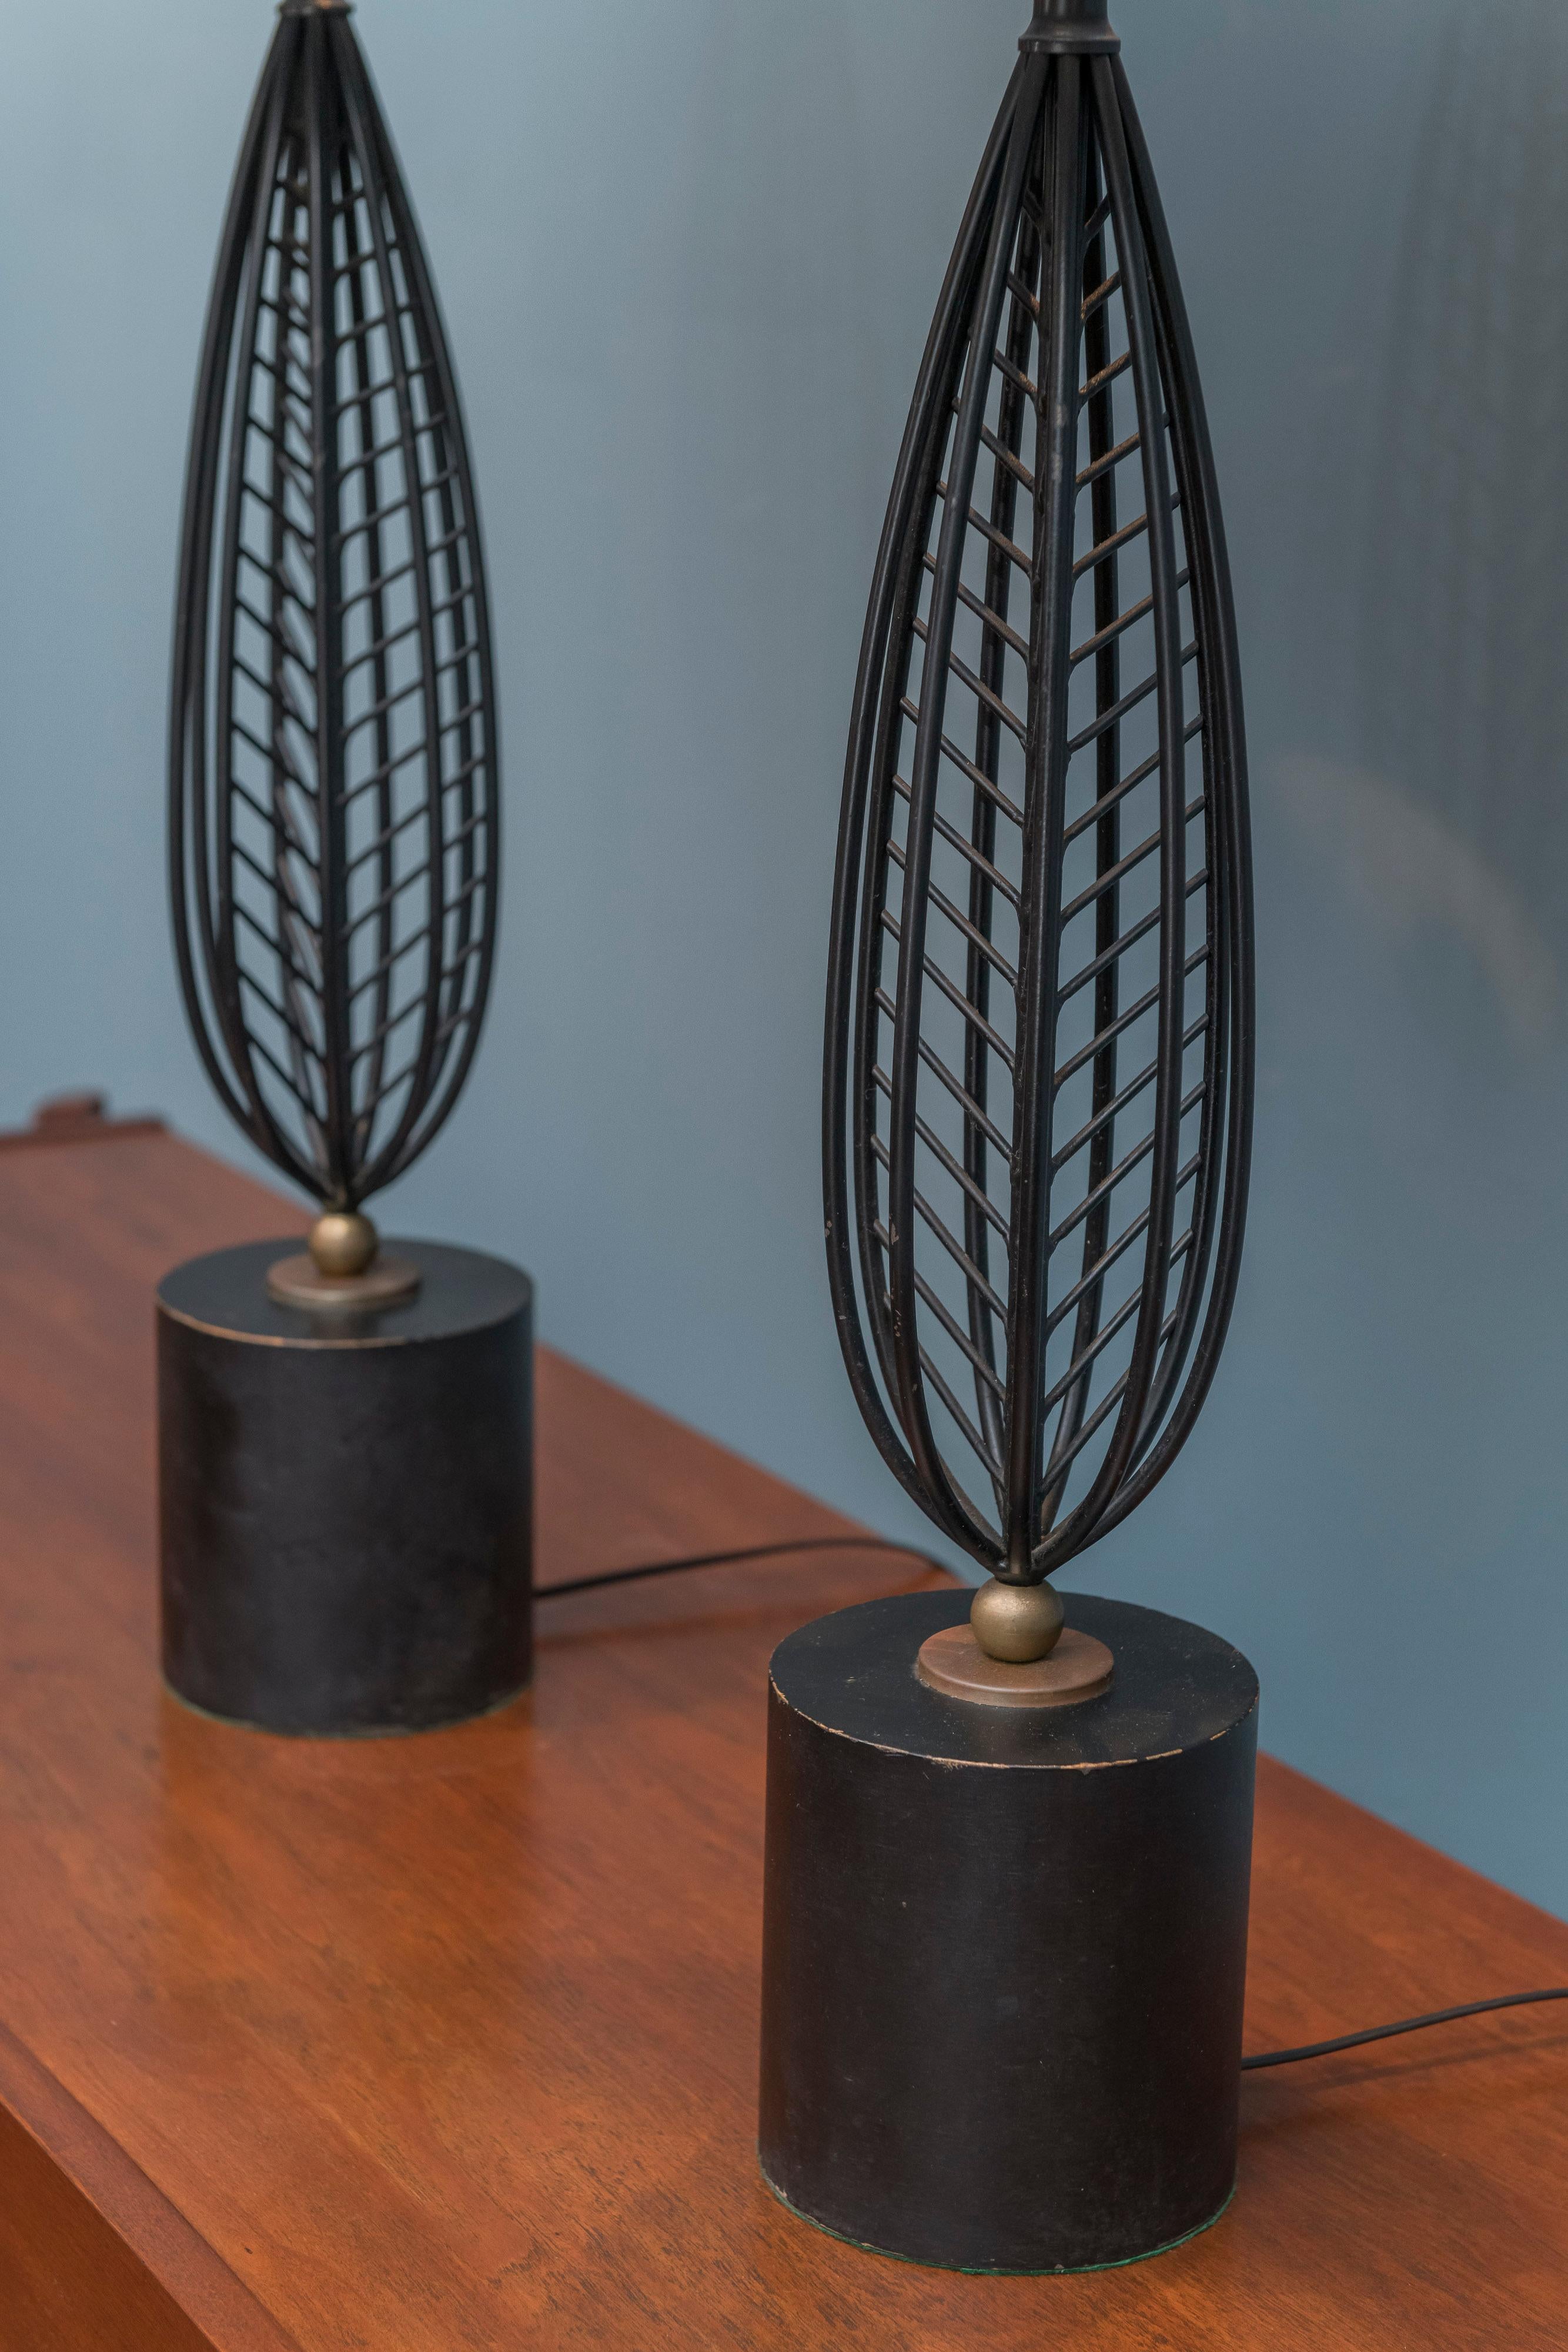 Mid-Century Modern table lamps made from painted black steel with gold accents on wood bases. Newly re-wired and restored. Height to the socket 27